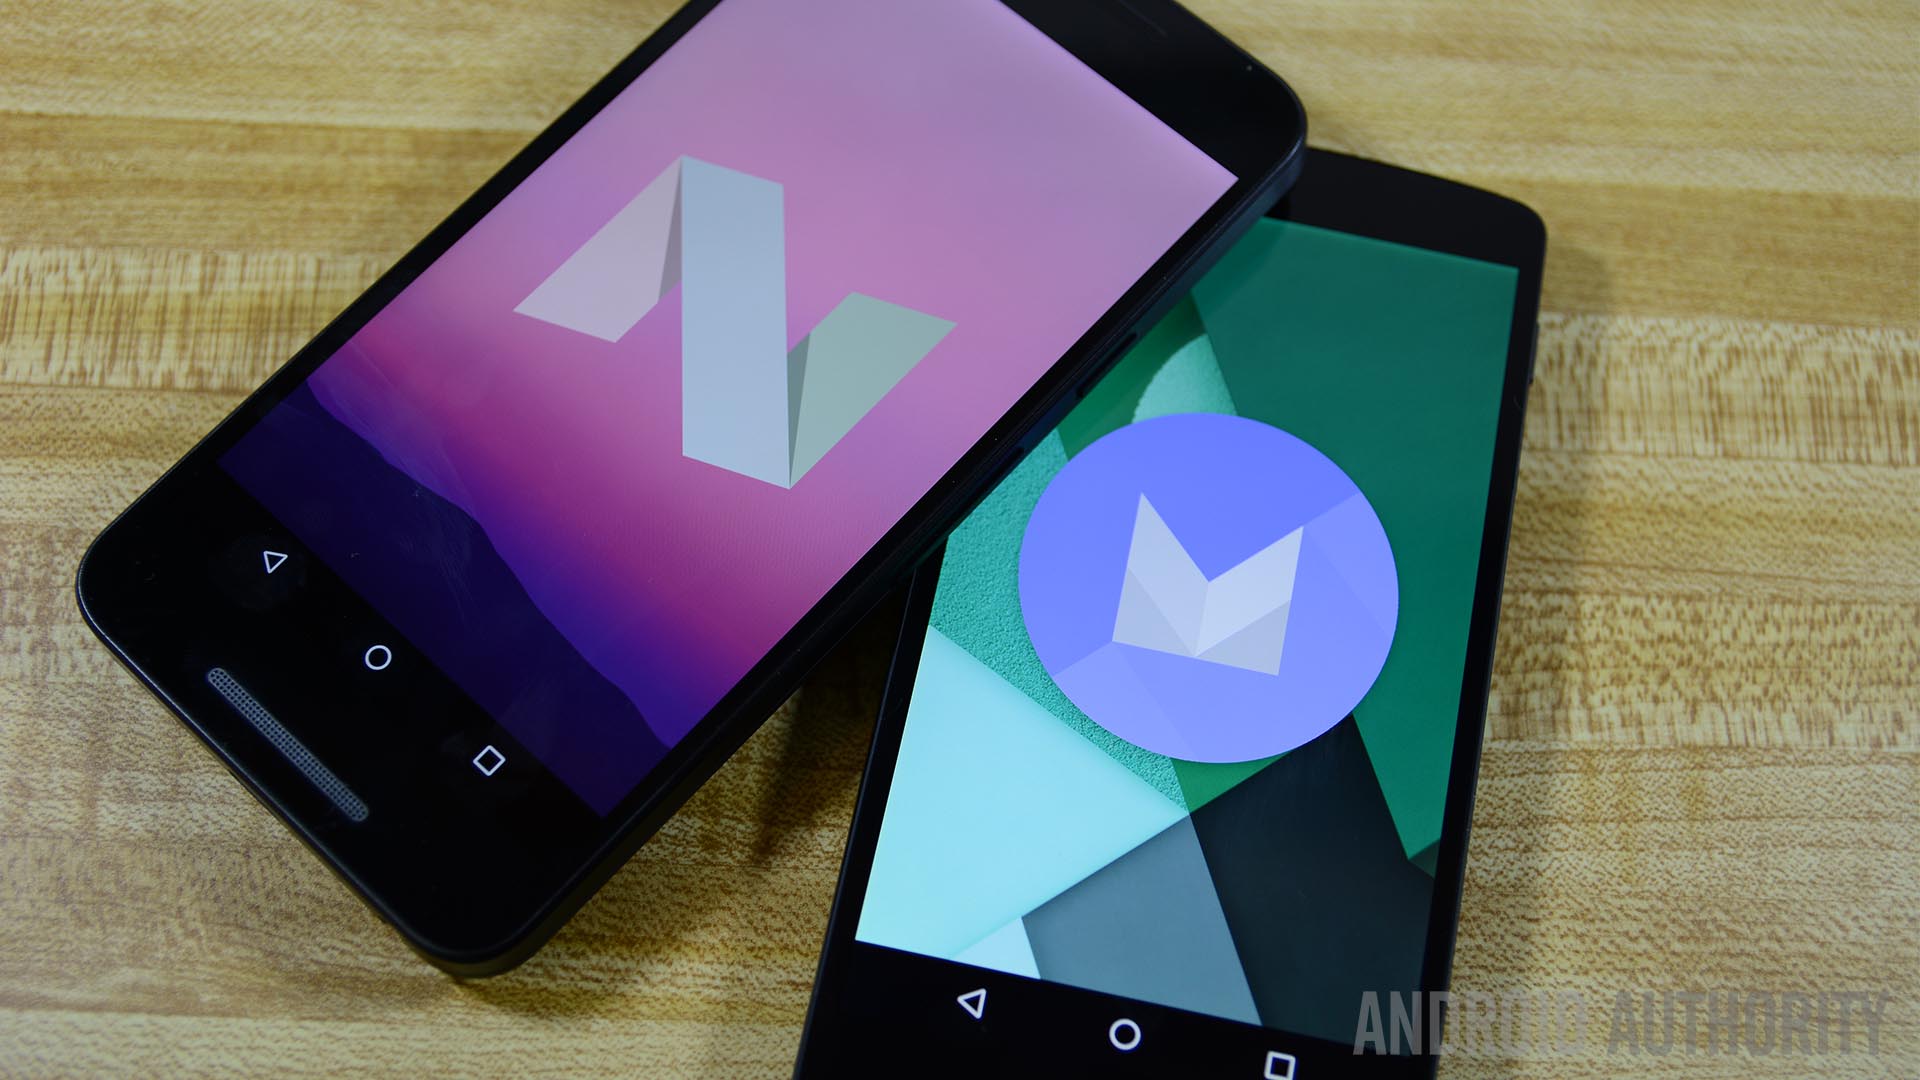 Android Marshmallow Android Nougat aww cuddles AA